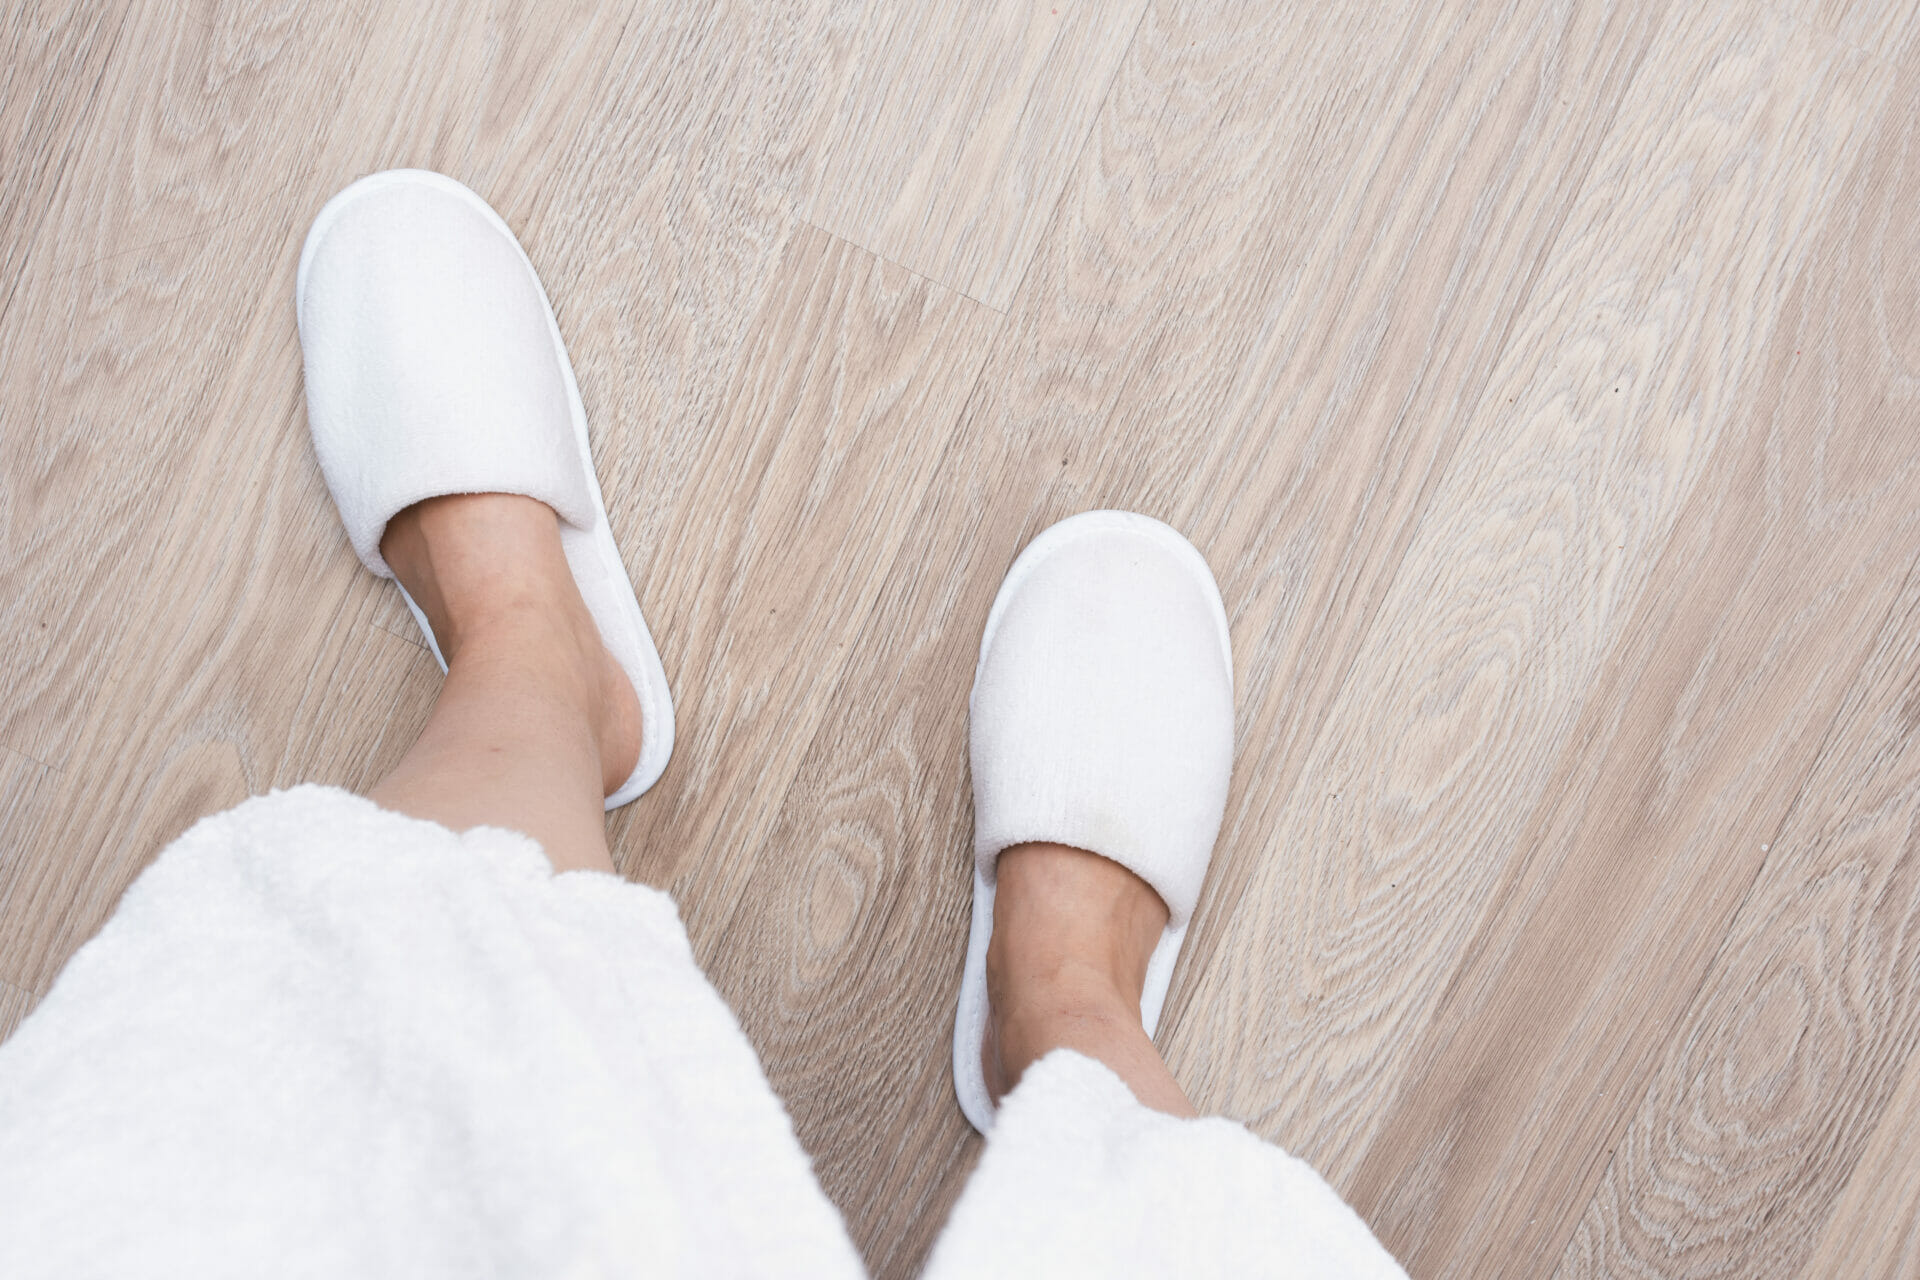 House Shoes: The Importance of Wearing a Pair Inside Your Home